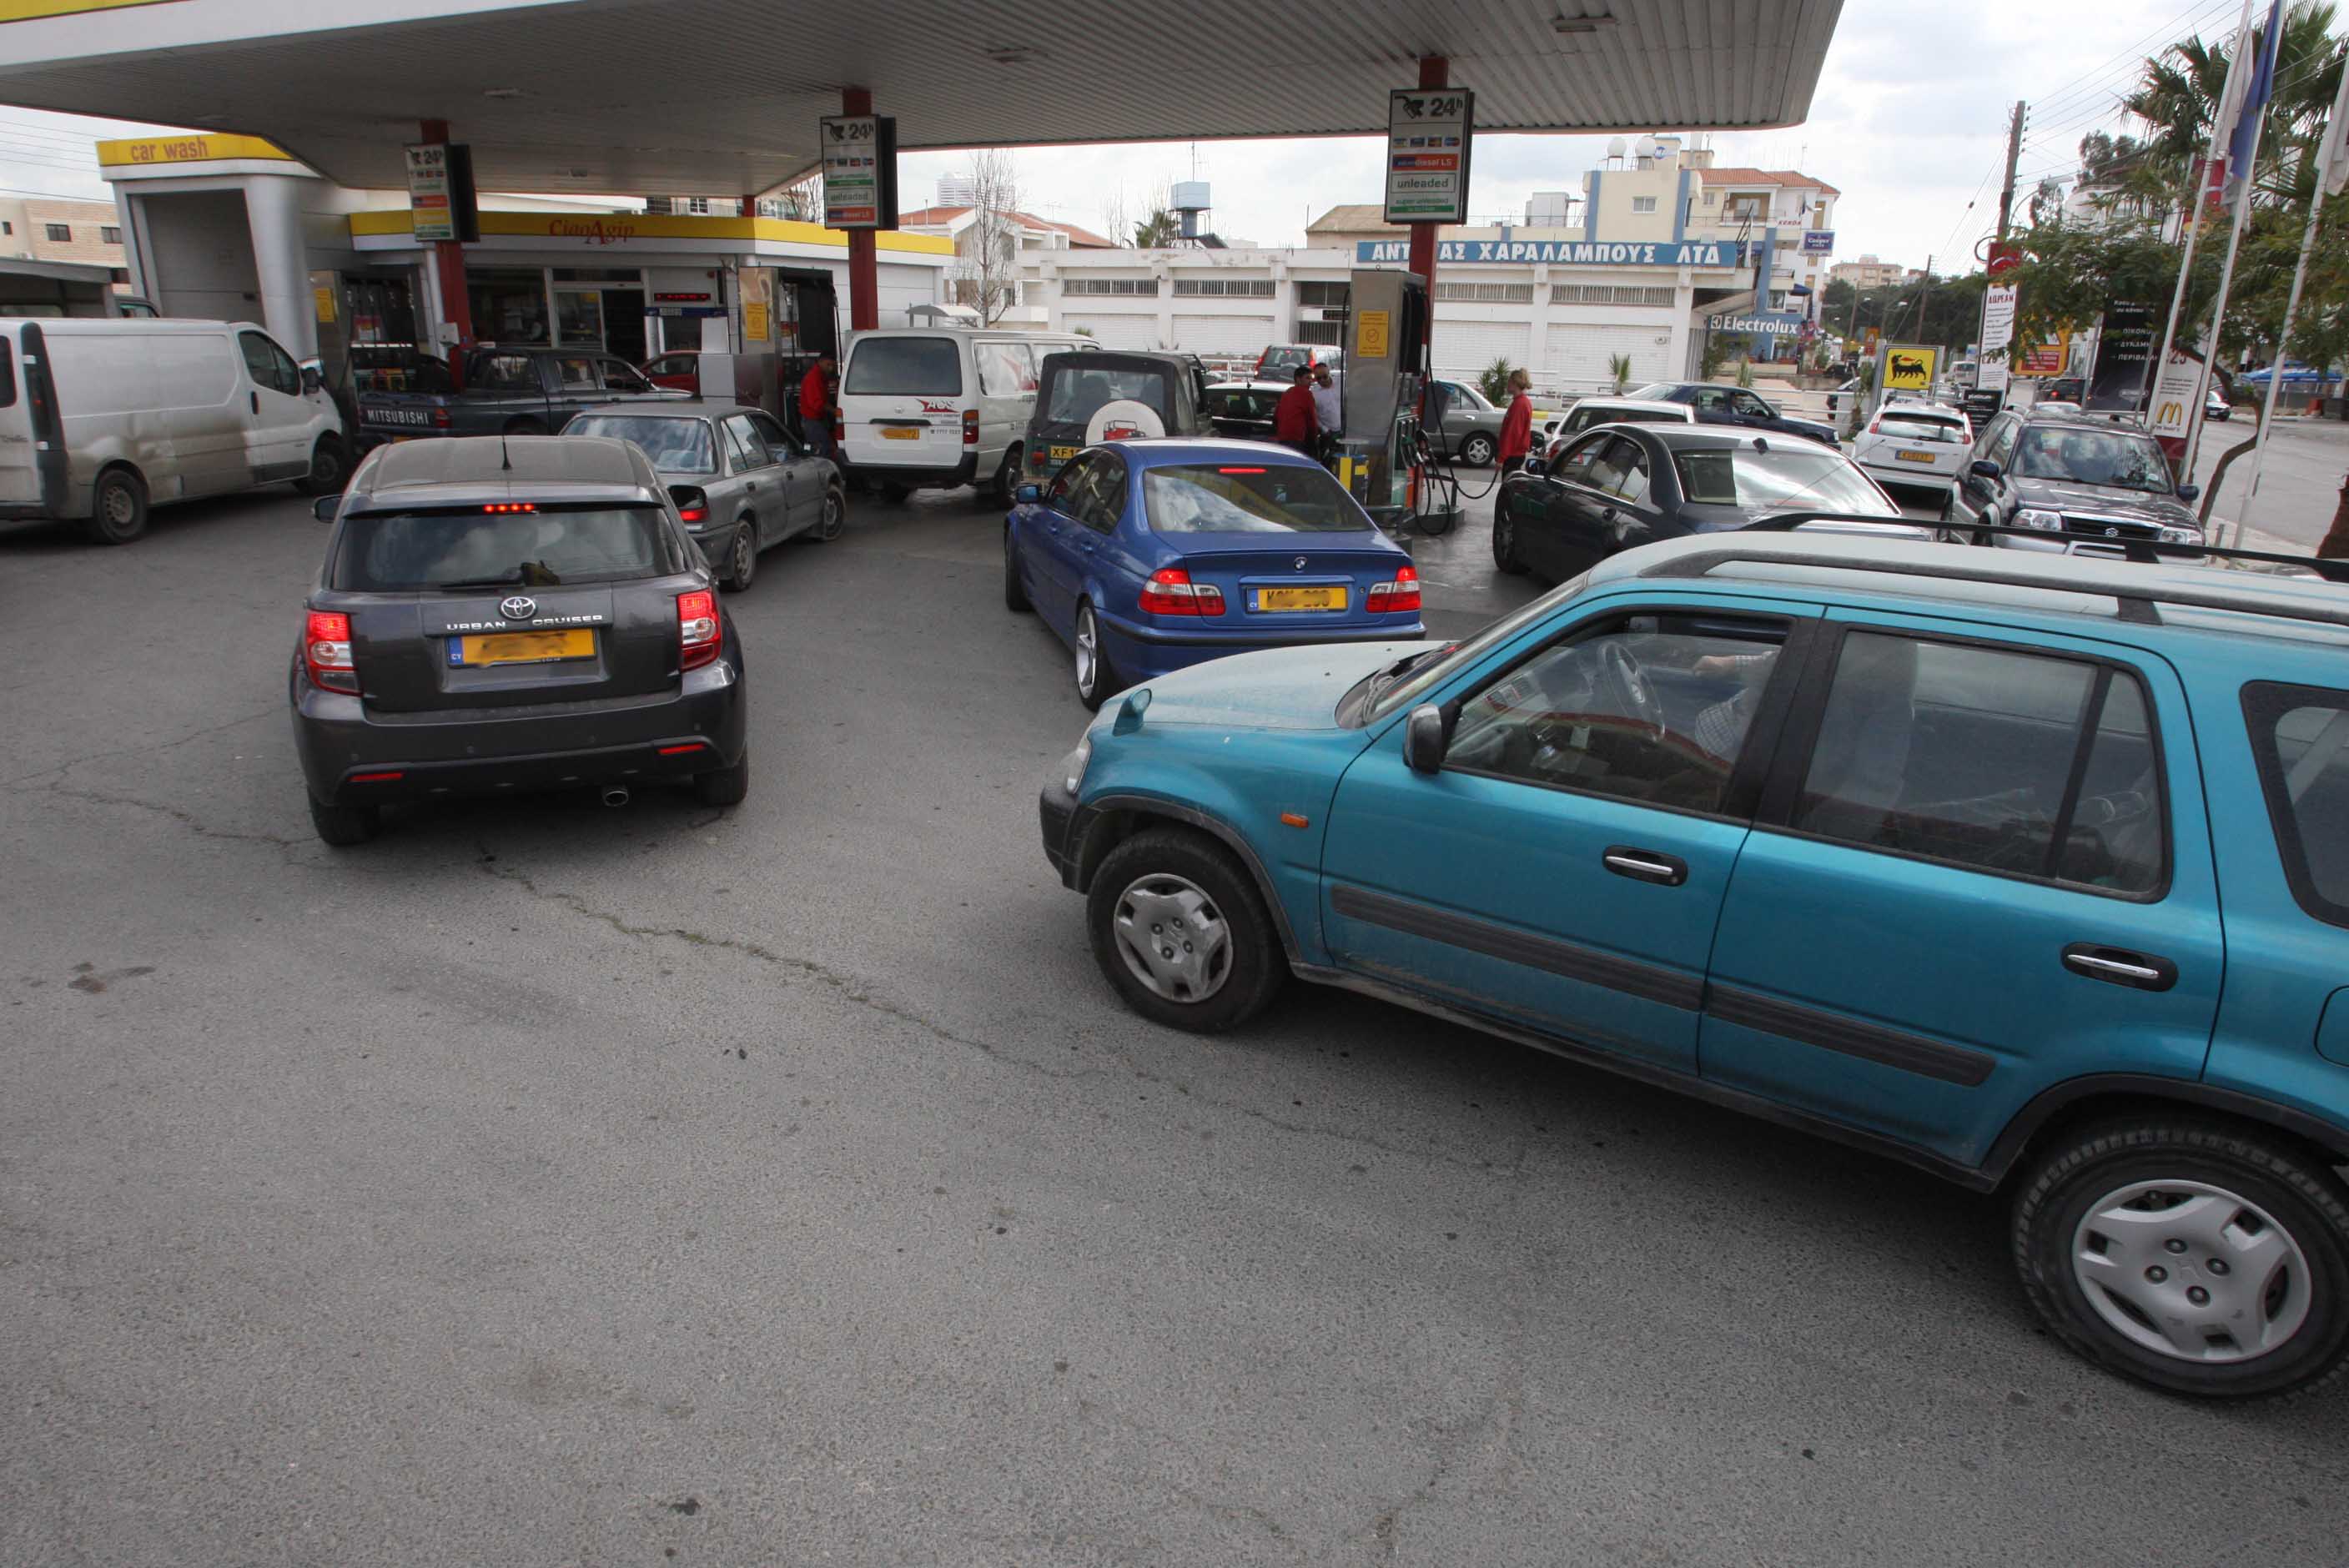 image Petrol stations packed as motorists beat price hike